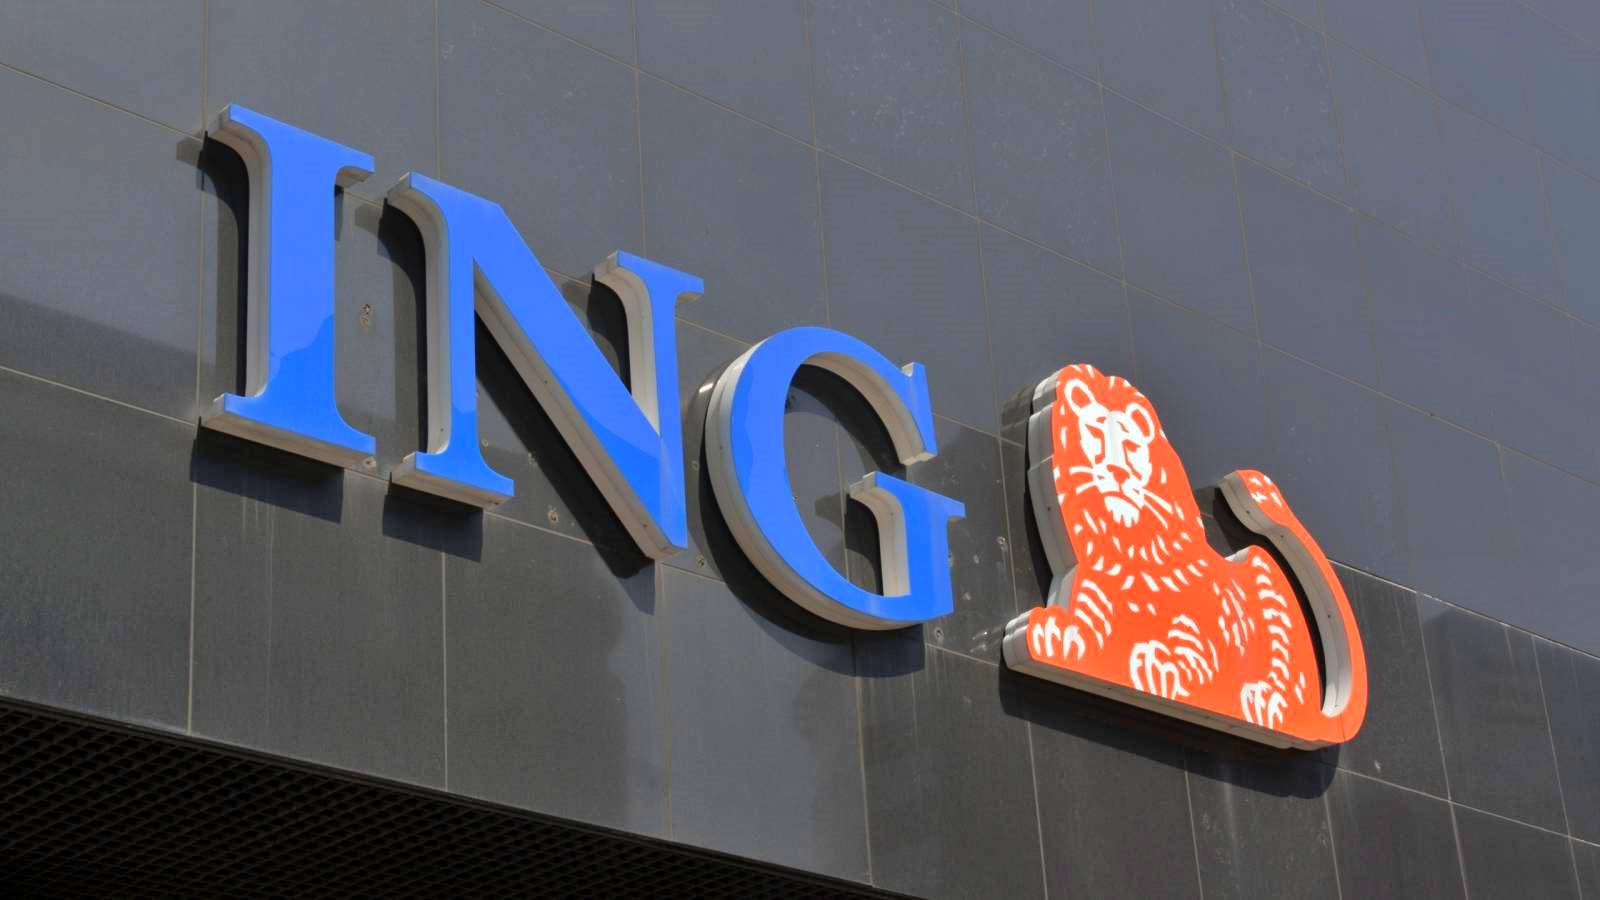 ING Bank's New Warning Targets Customers Must Be Ignored